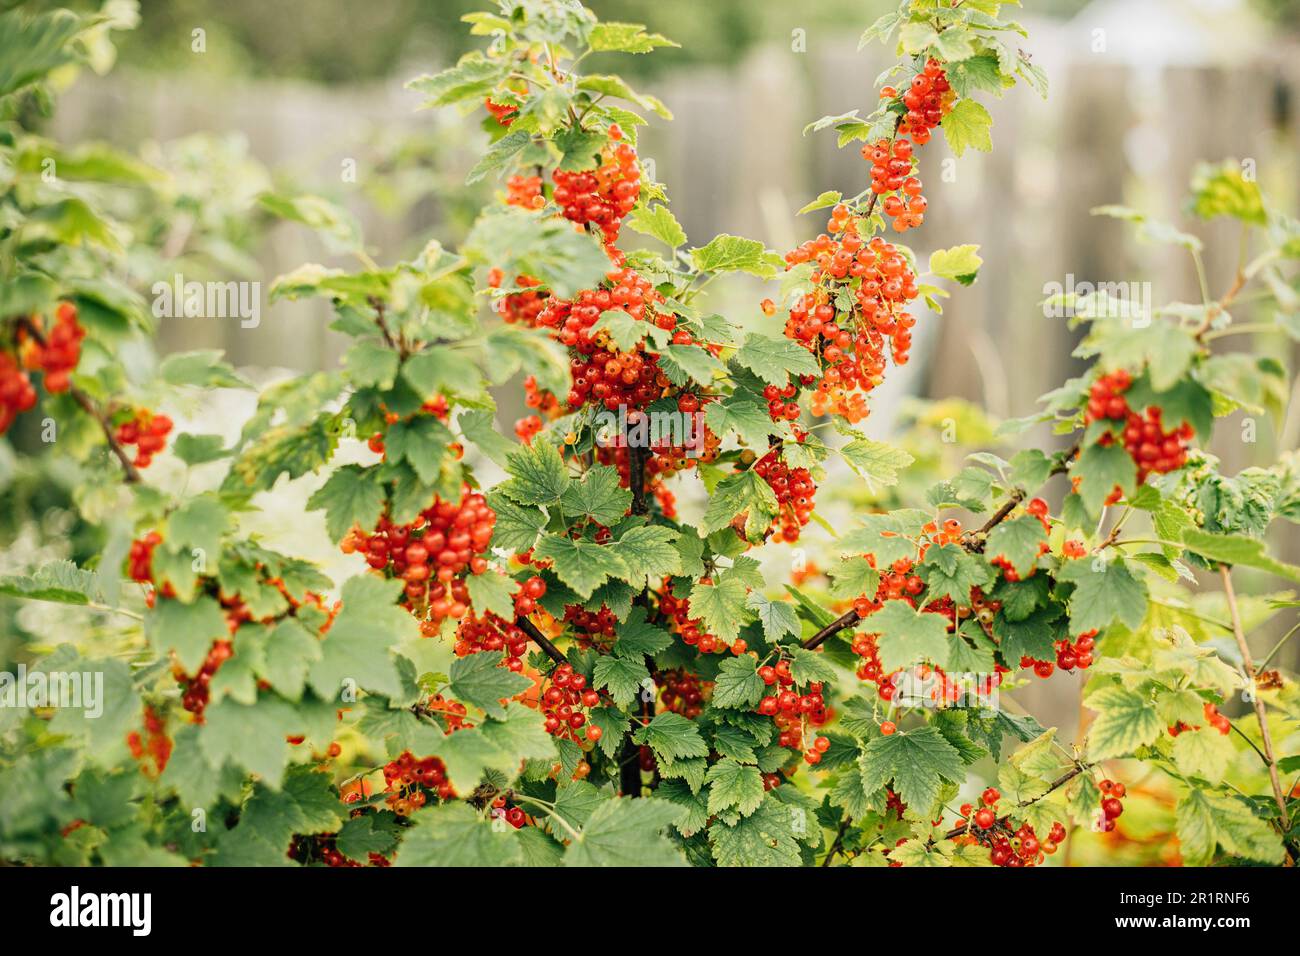 Bush Of Redcurrant Or Red Currant Ribes Rubrum Branch. Growing Organic Berries In Garden. Ripe Currant Berries In Fruit Garden At Summer Sunny Day. Stock Photo